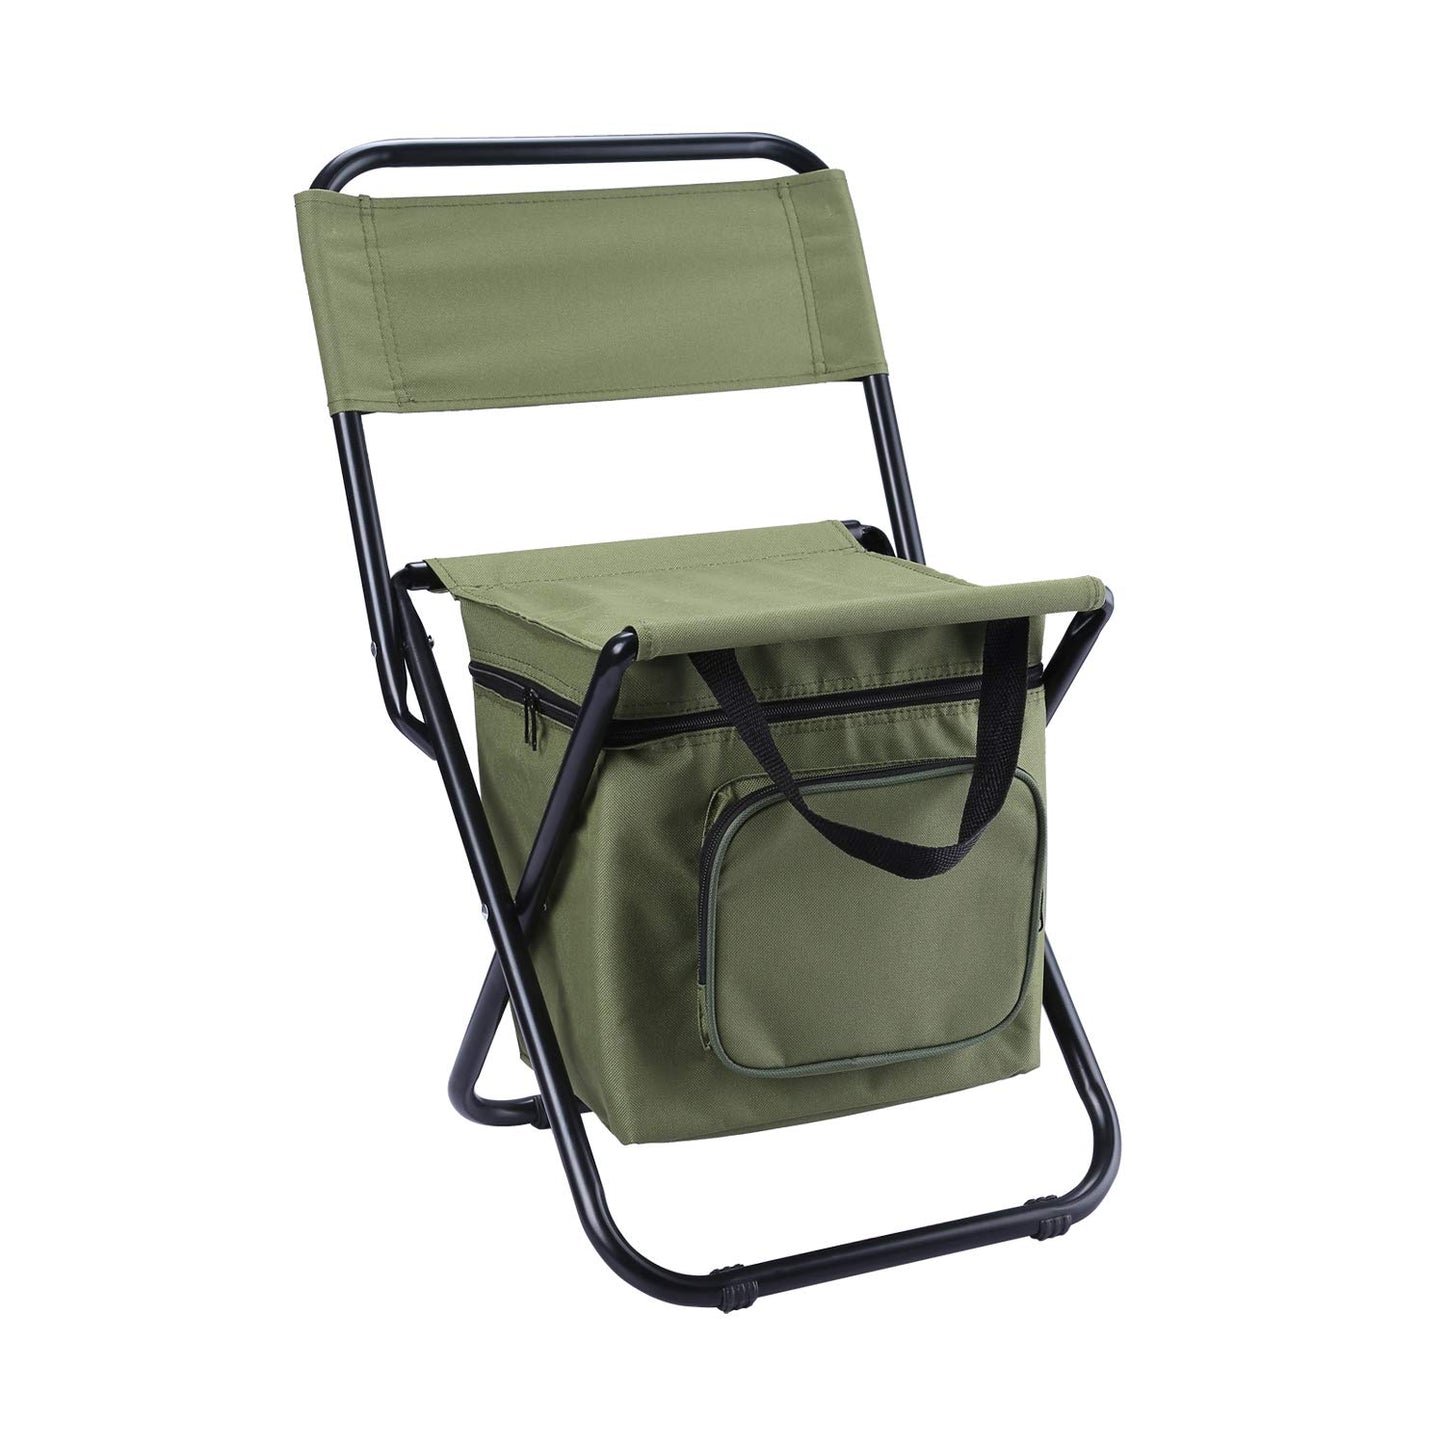 LEADALLWAY Fishing Chair with Cooler Bag Compact Fishing Stool Foldable Camping Chair